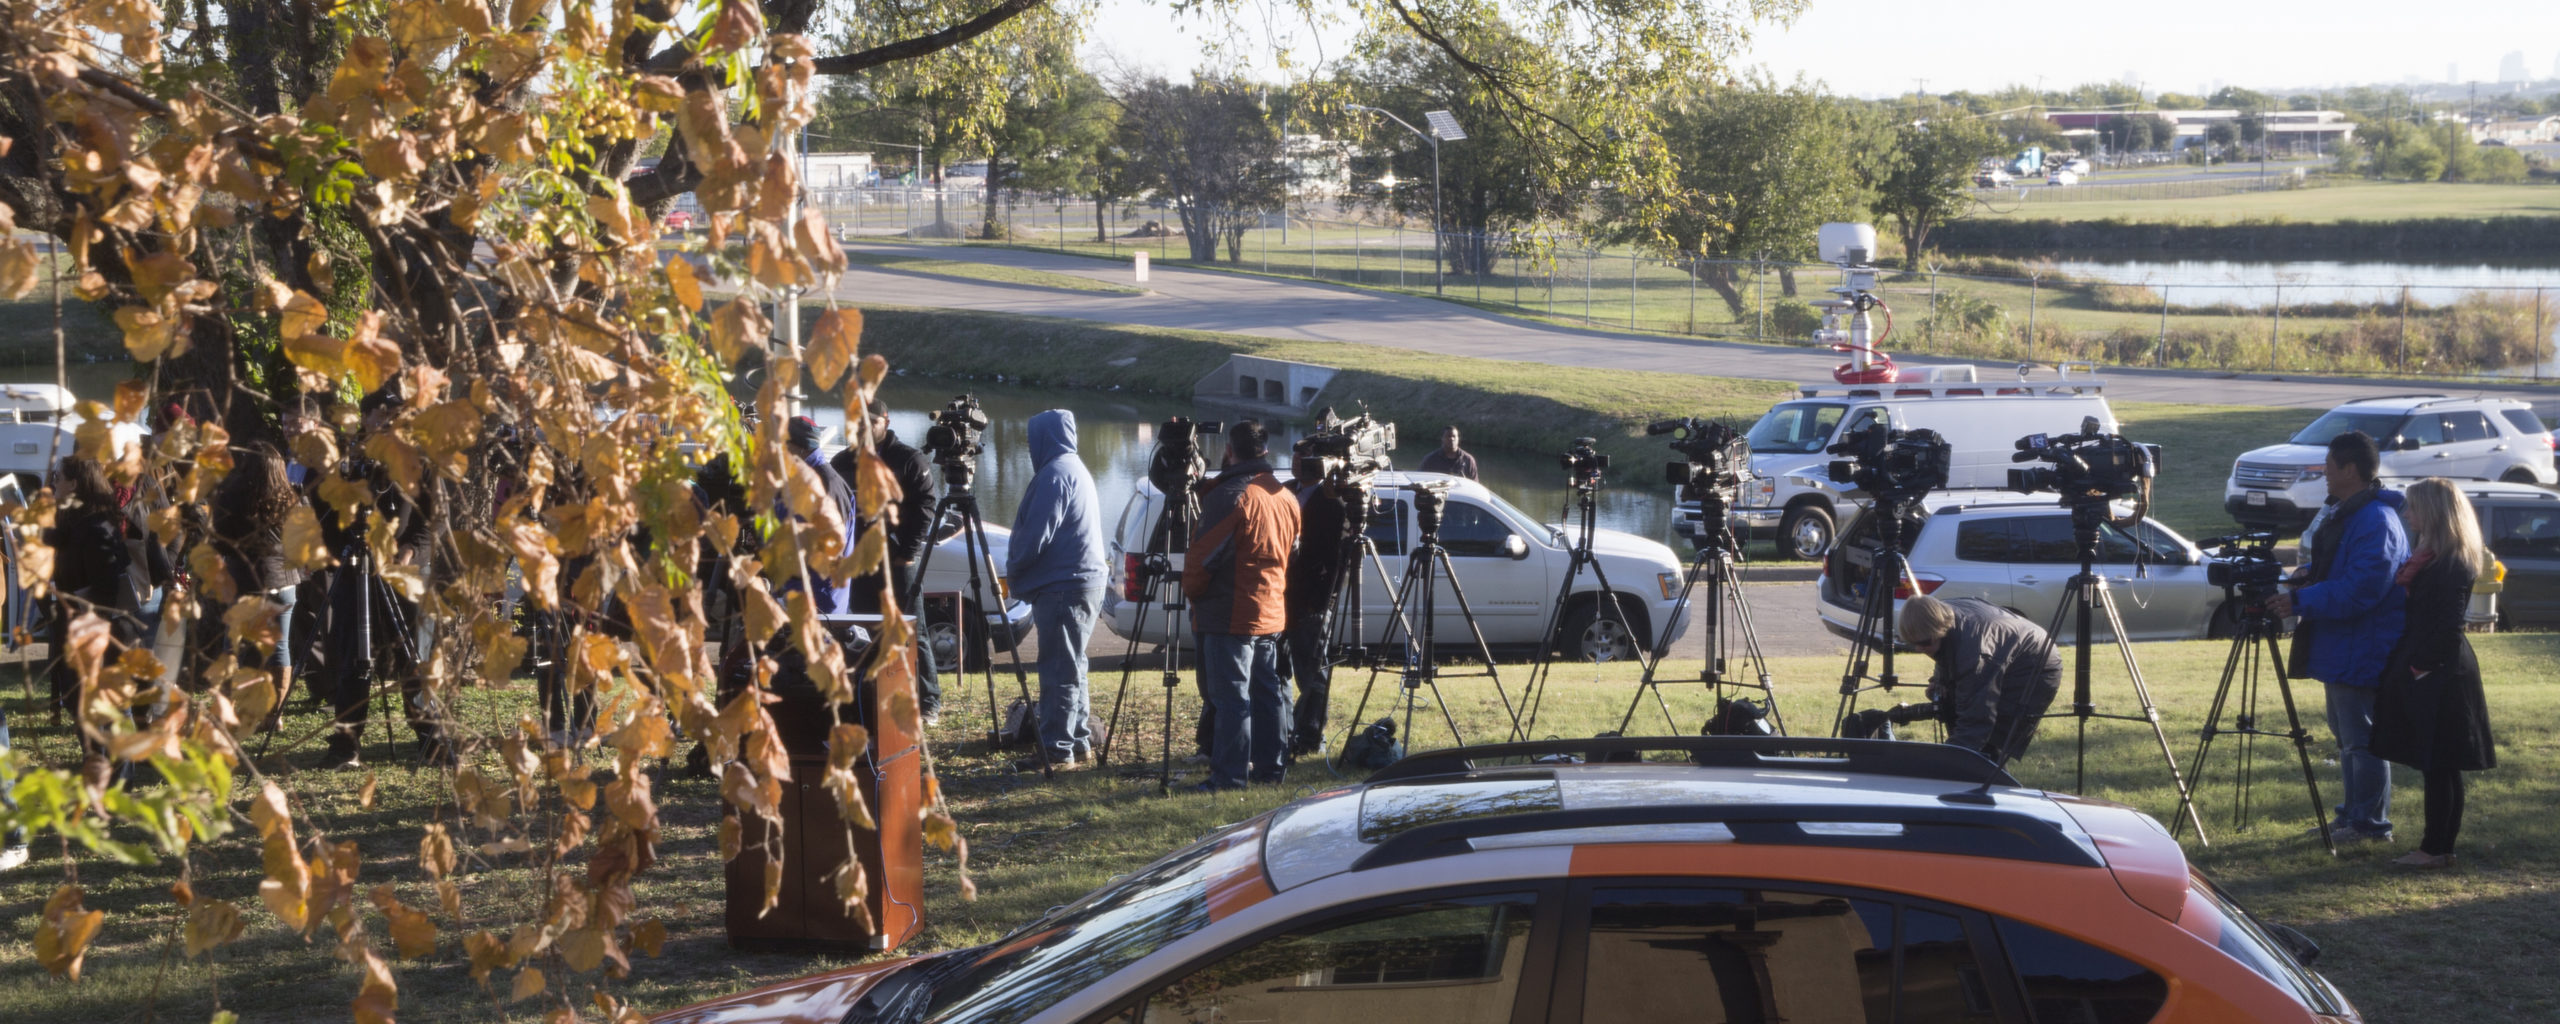 News reporters and camera operators with news vehicles gather outside for a press conference